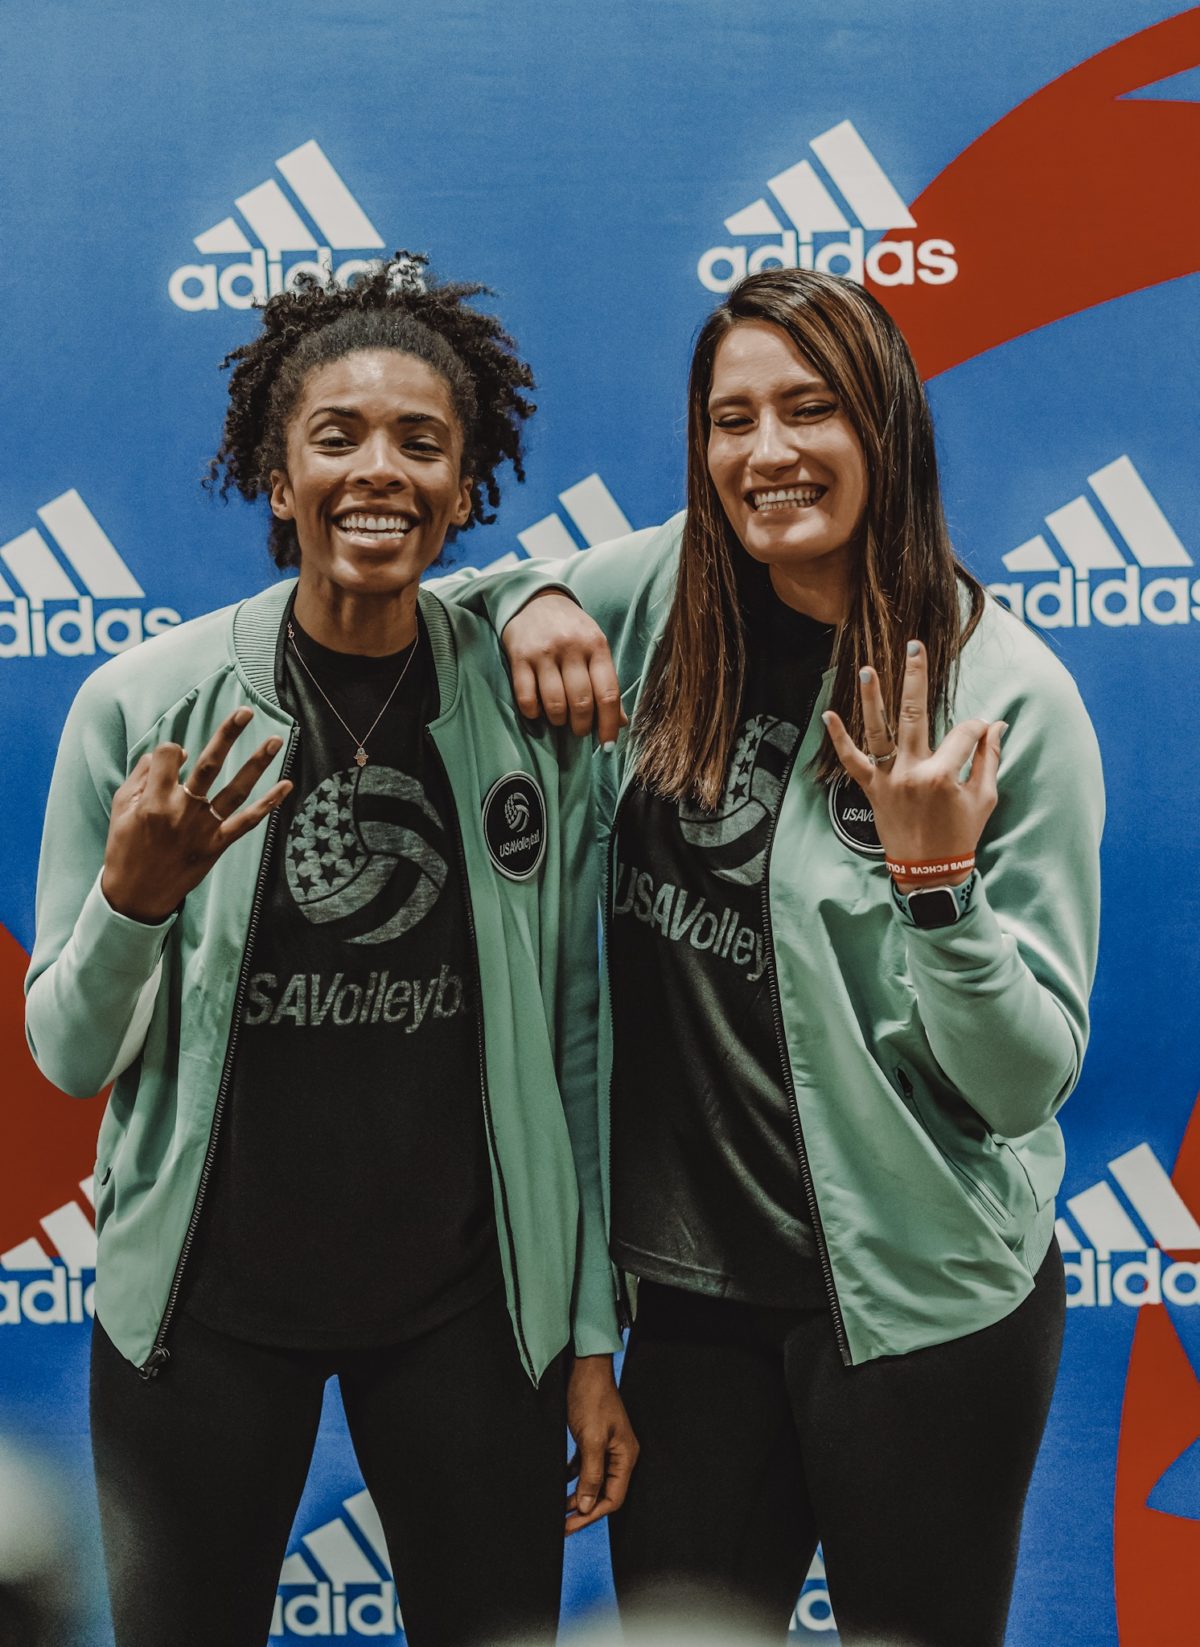 Two smiling women standing in front of an Adidas poster each gesturing three figures